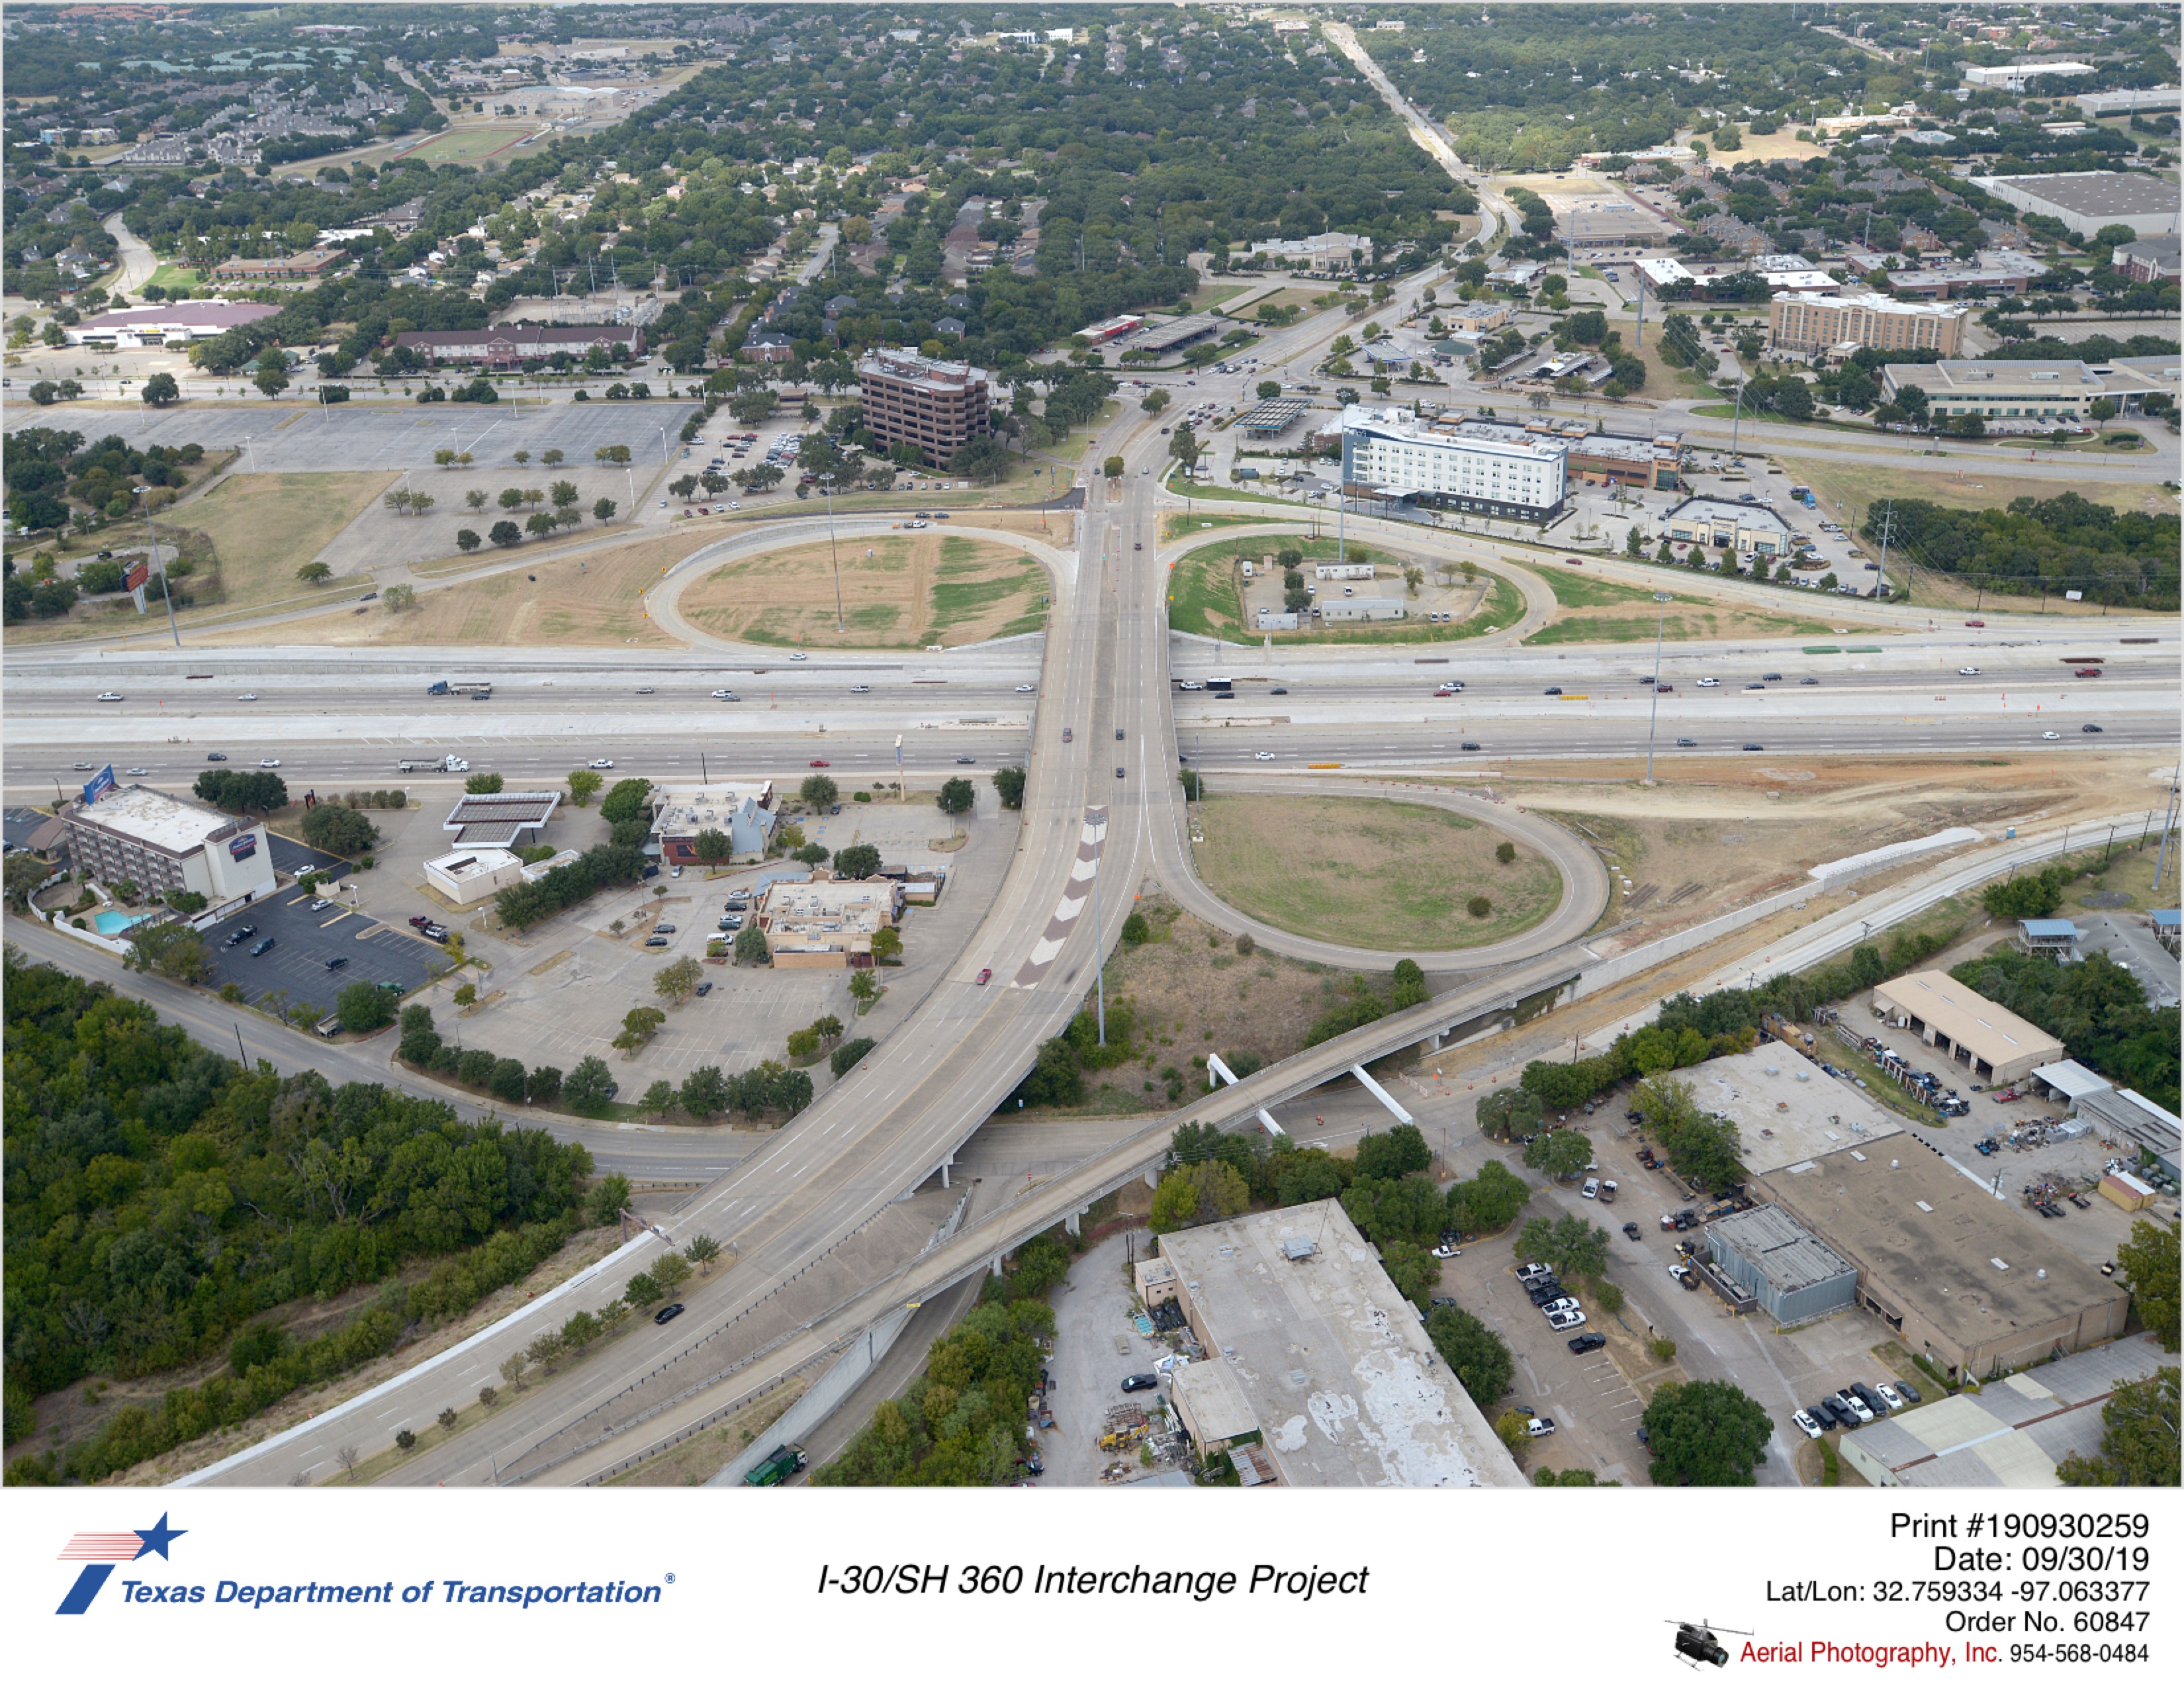 I-30 construction at Ballpark Way interchange looking north. Completed westbound exit to southbound Ballpark Way.